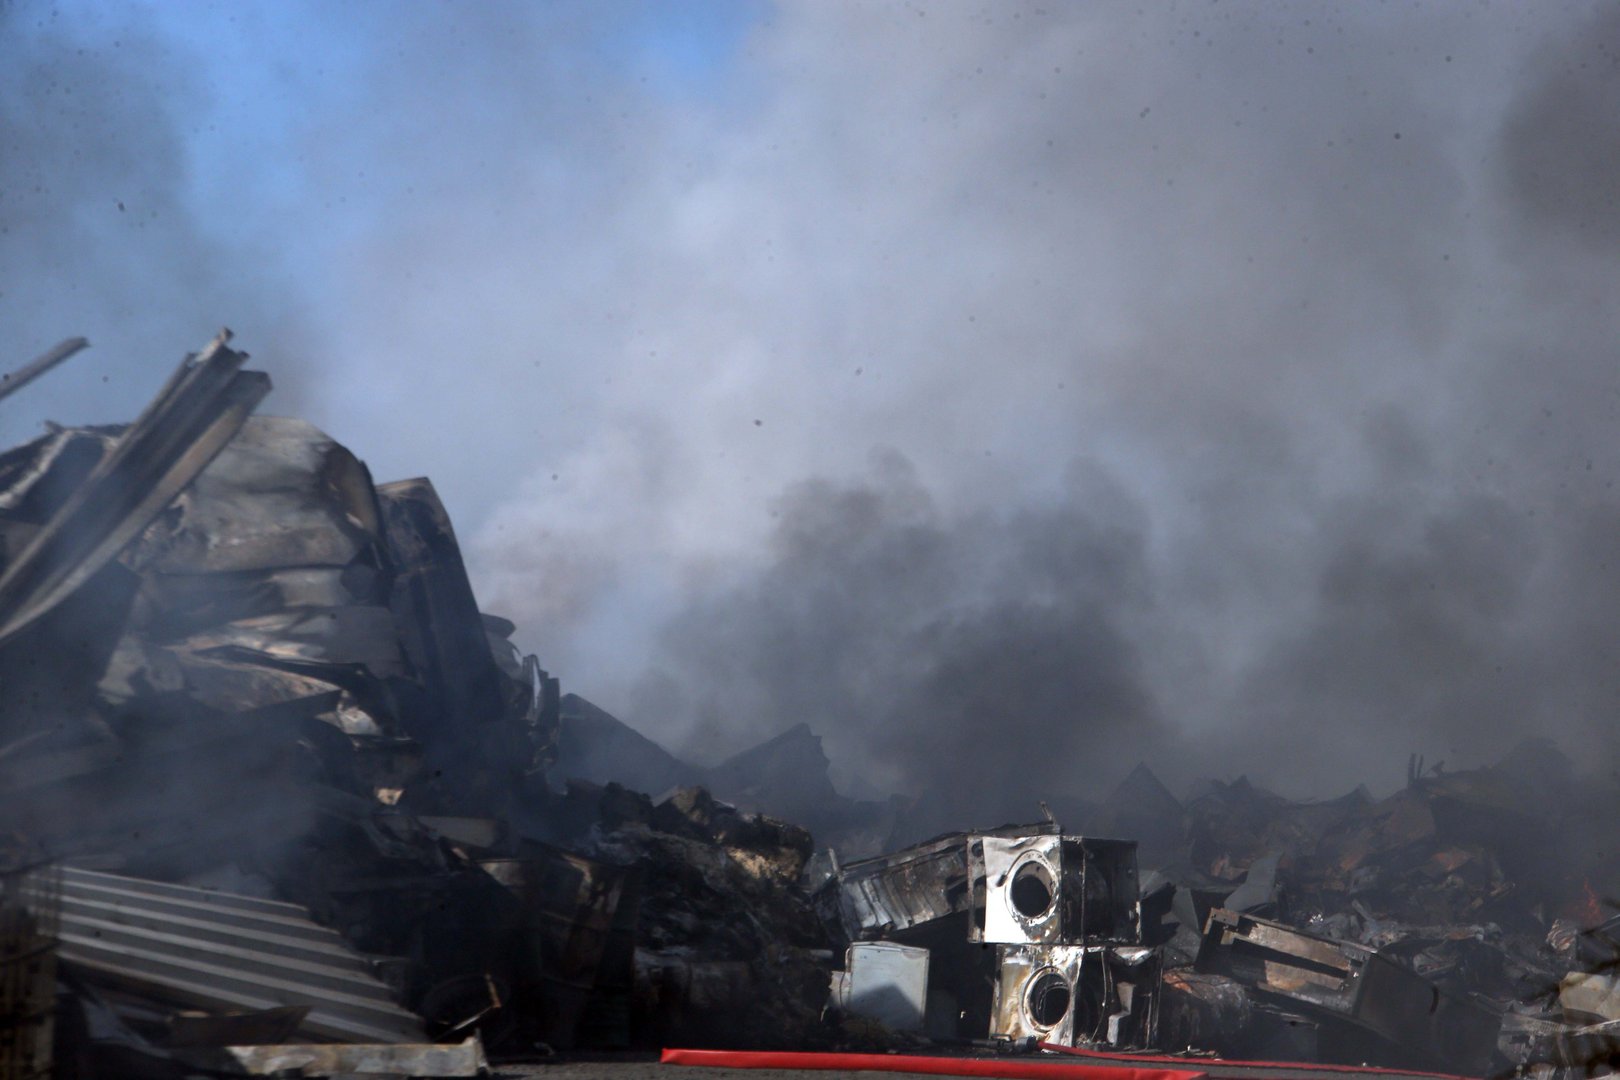 image ‘No health hazard’ from factory fire, officials assure